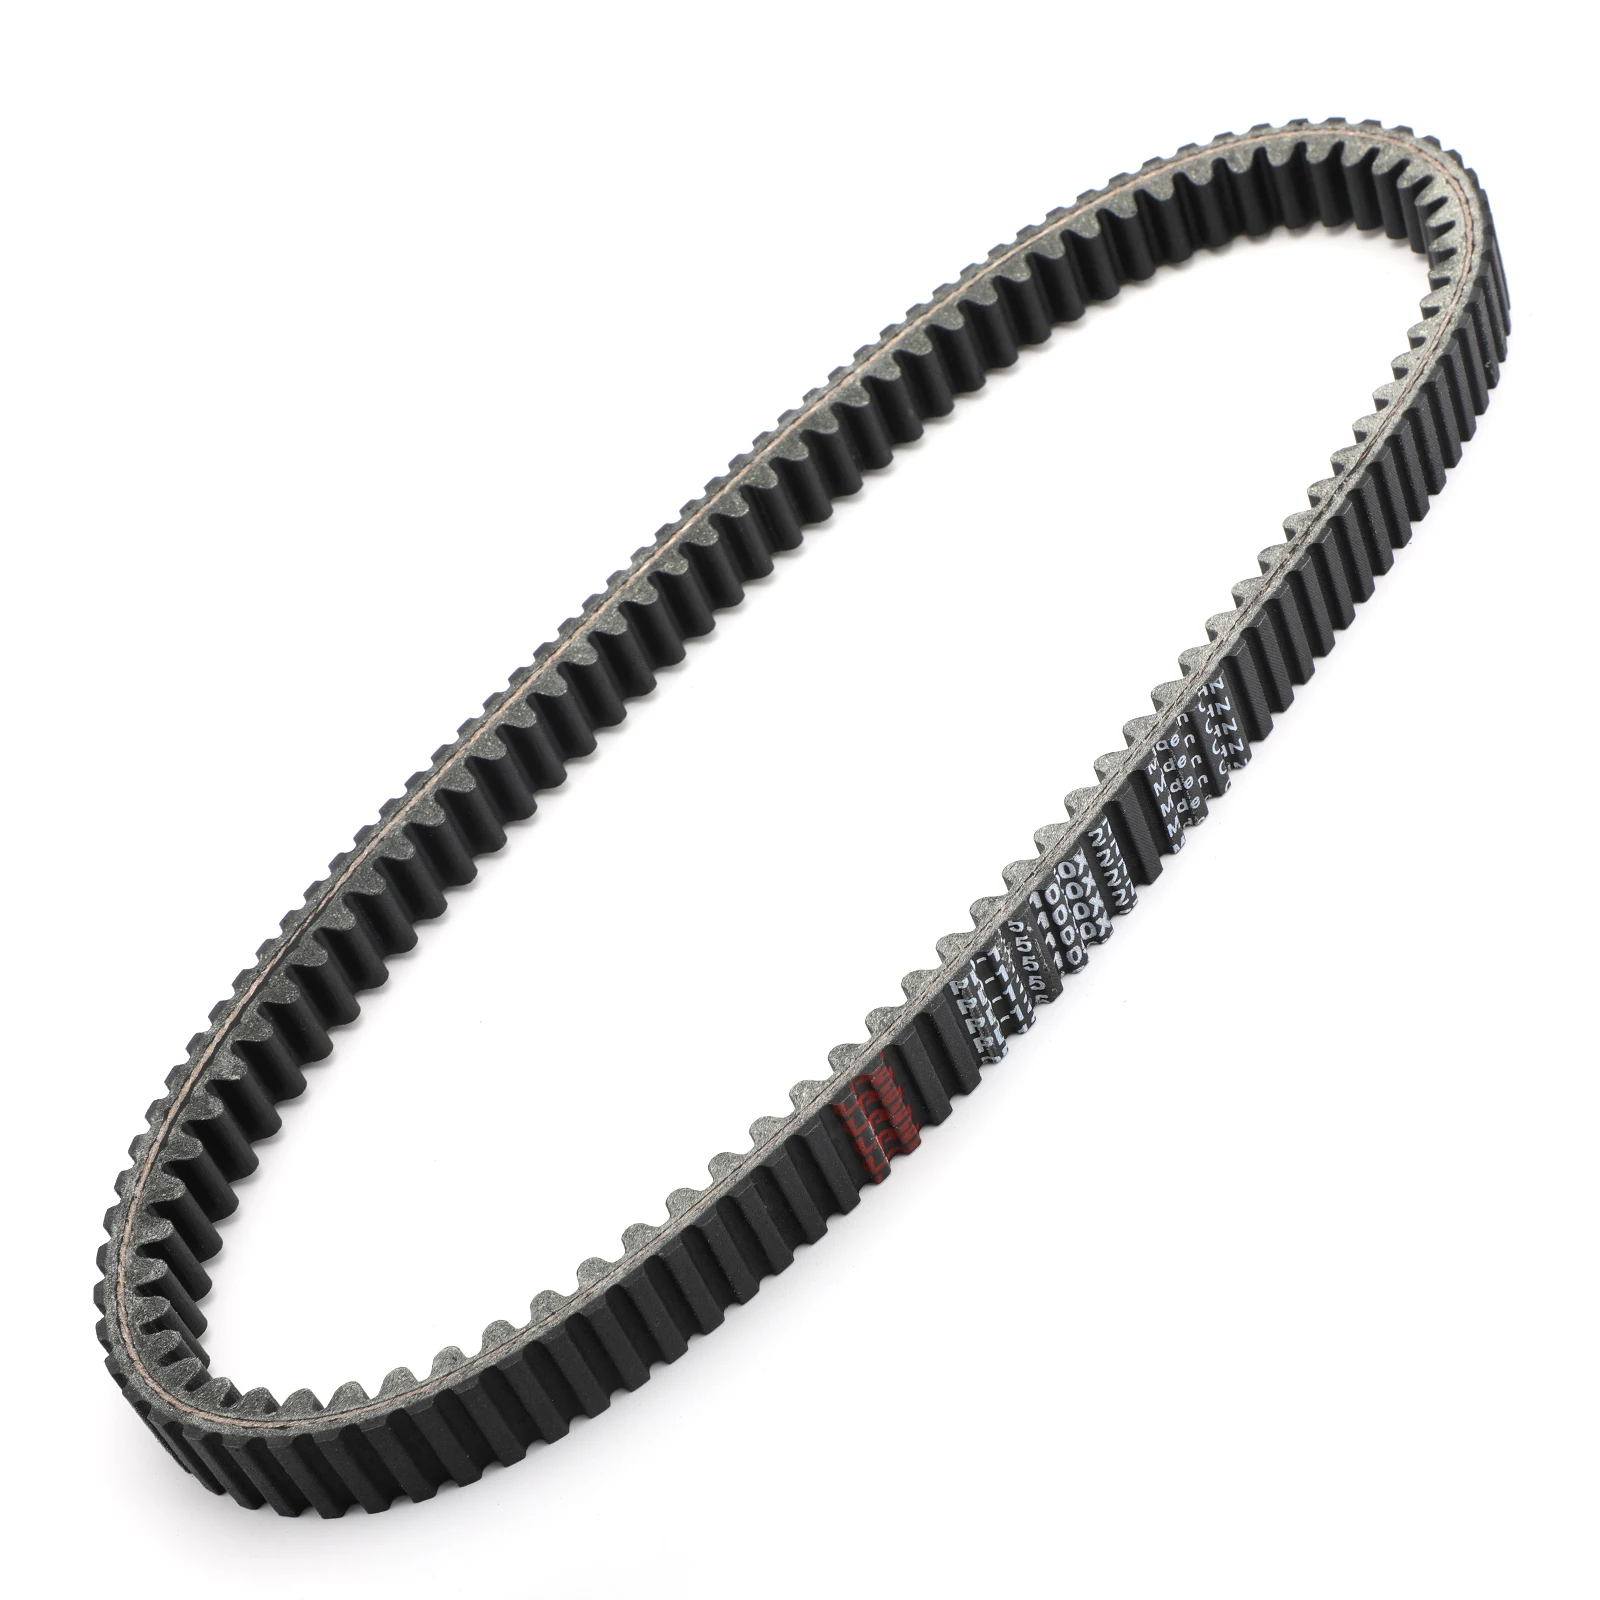 Topteng Drive Belt For Piaggio Master 3 Wheelers Scooter 400 400cc 500 500cc 2011 Motorcycle Accessories Parts